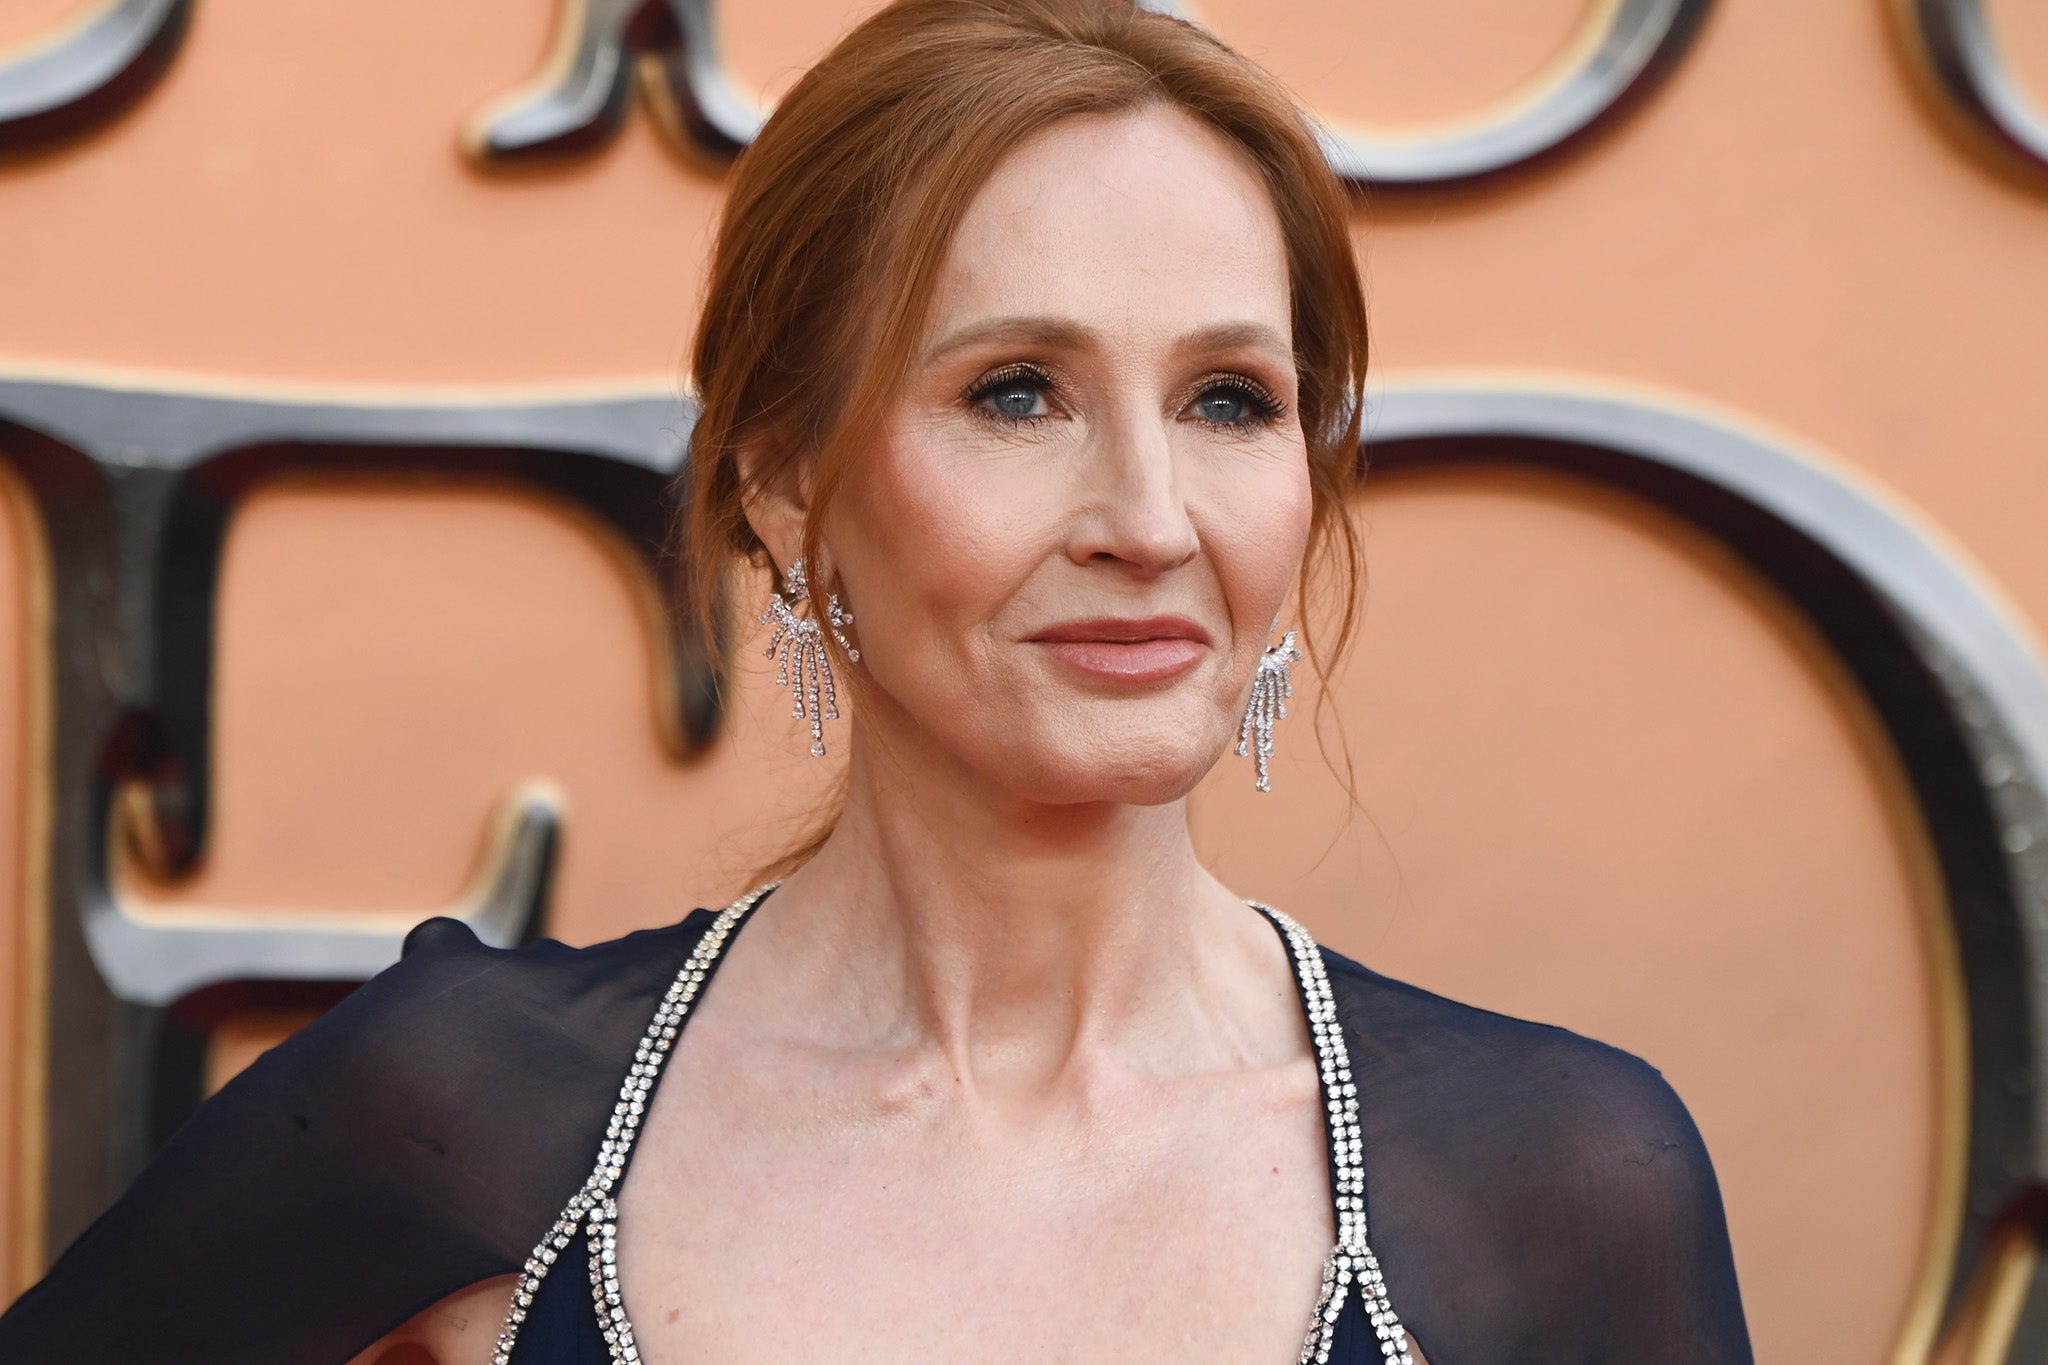 JK Rowling is aware that a play about her critical views of transgender people is set to appear at the Edinburgh Fringe Festival.